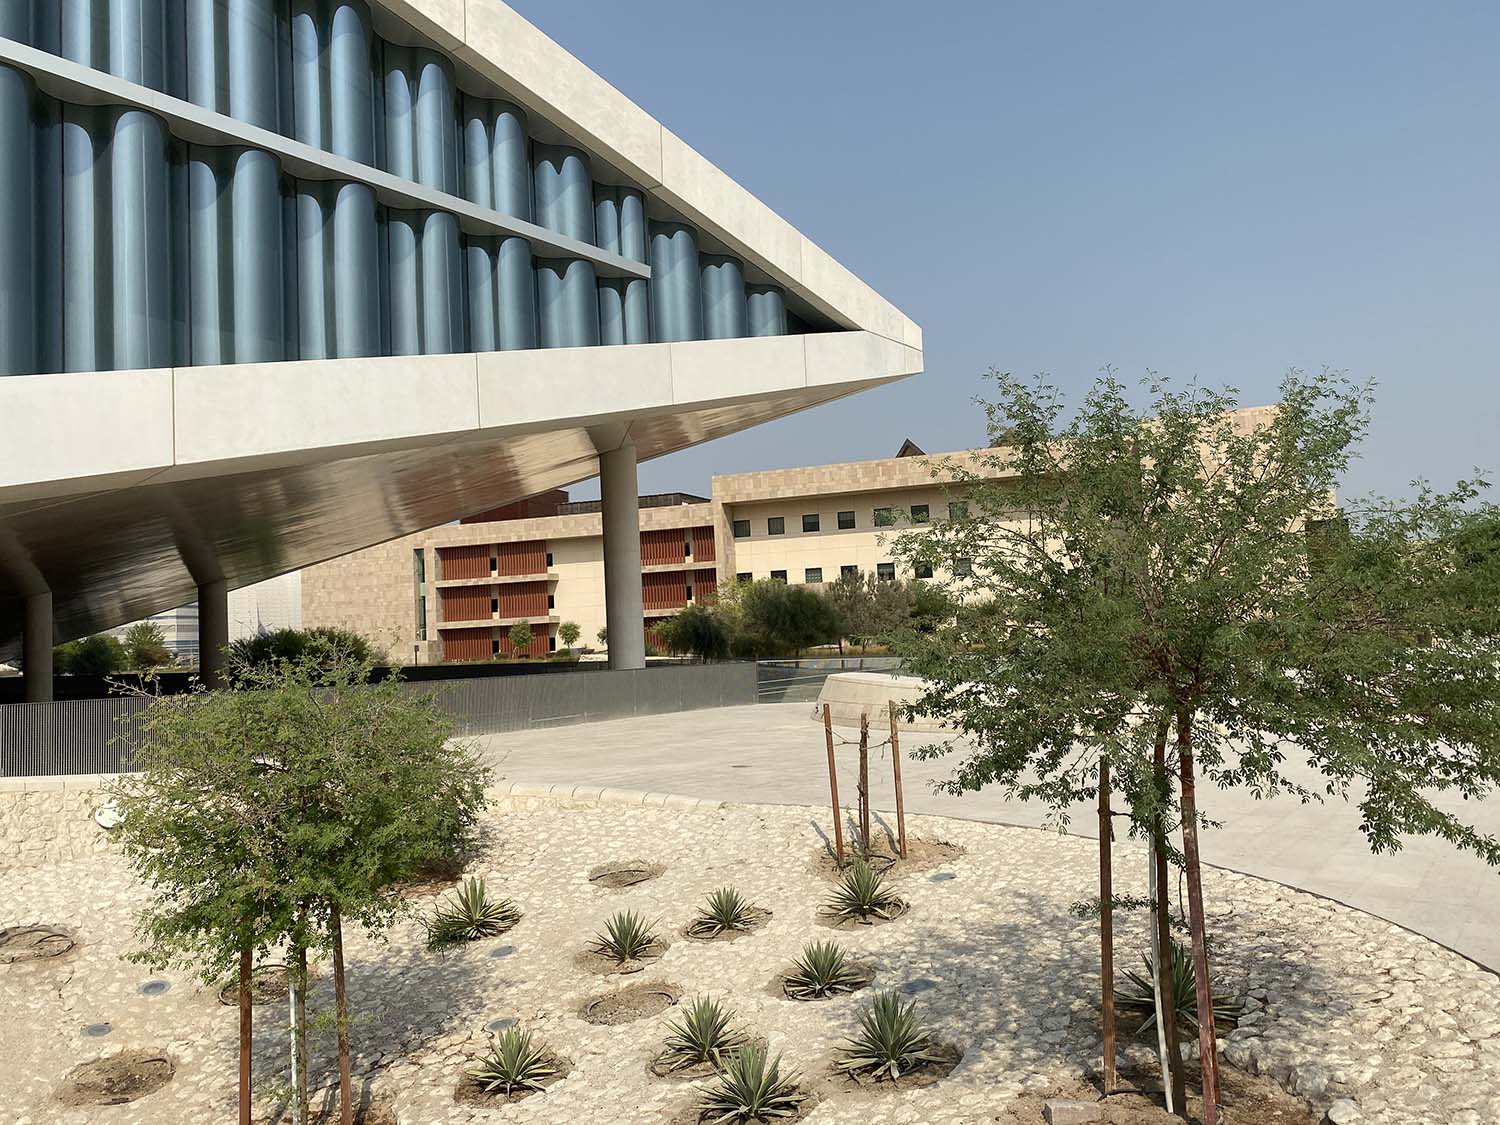 Exterior view, Qatar National Library; Georgetown University in Qatar visible in background